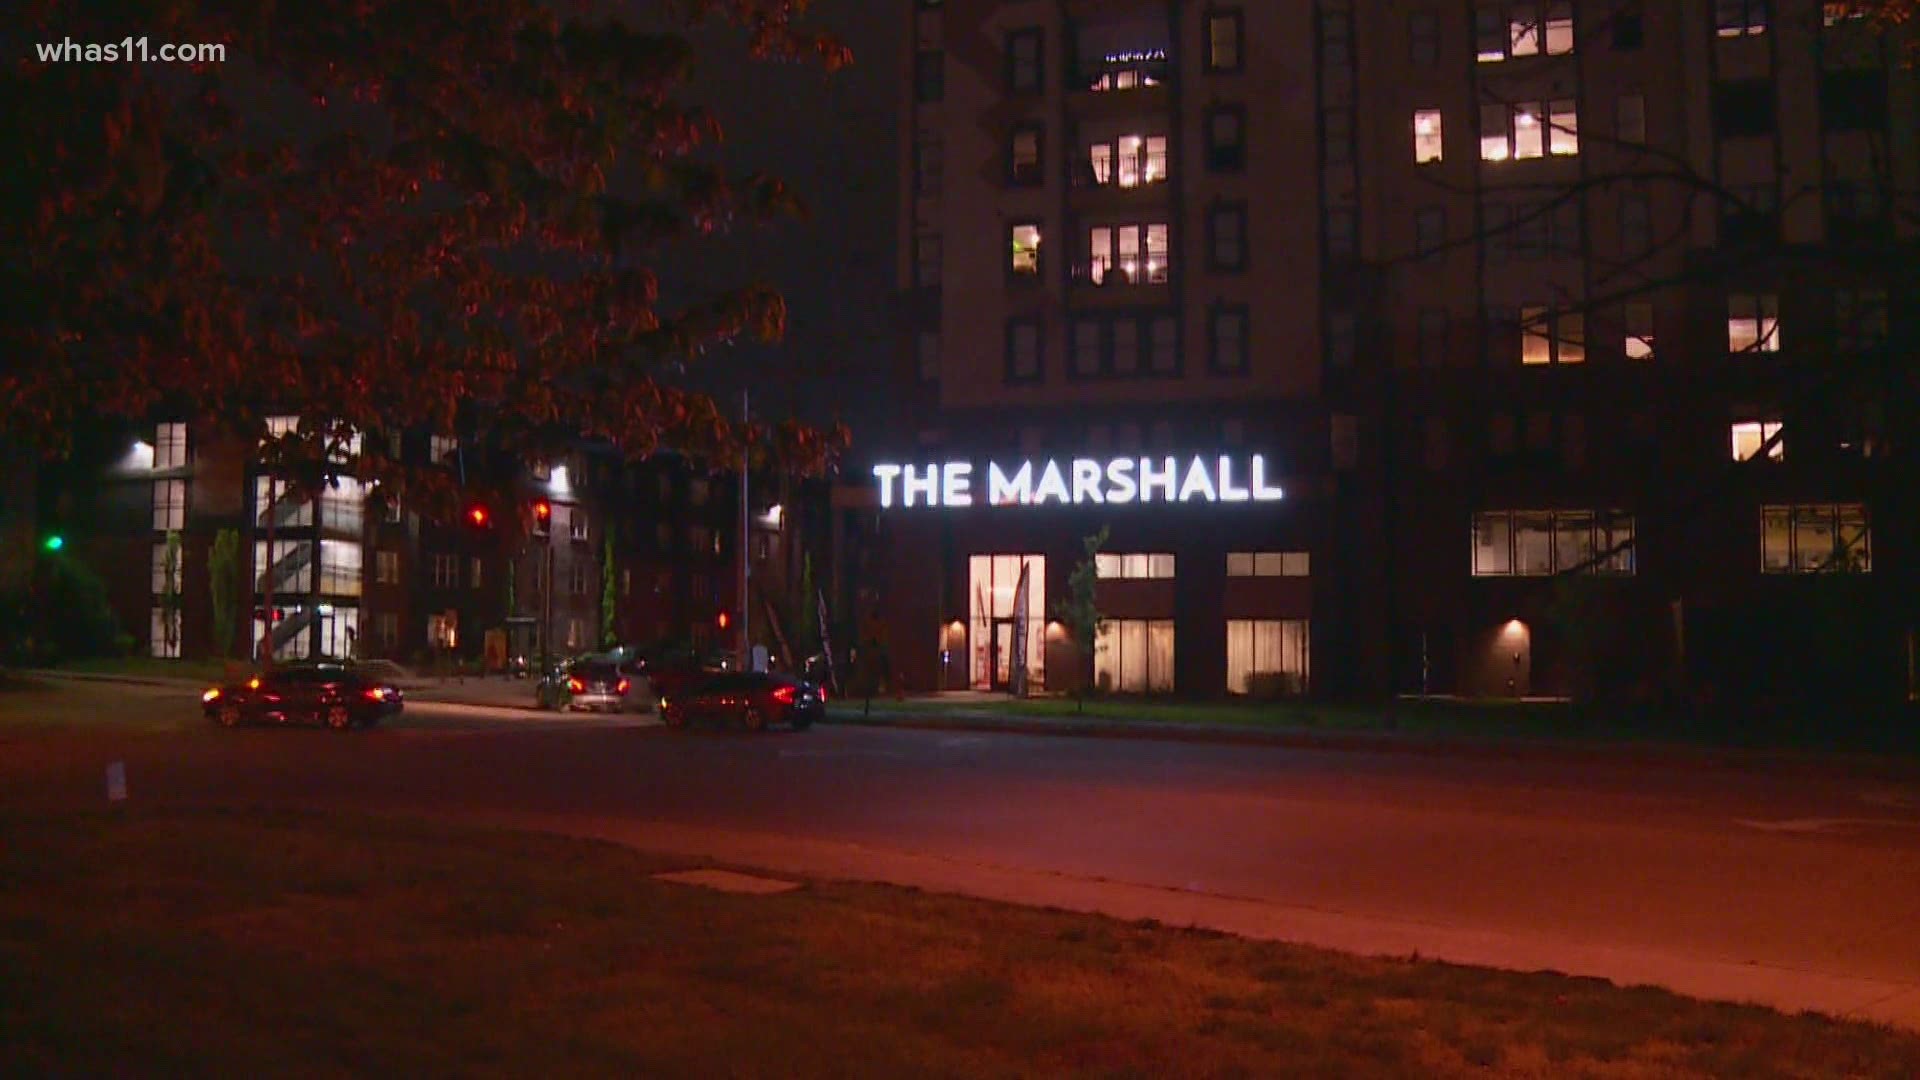 Since our initial investigation, more students have reached out to FOCUS claiming the Marshall is unsafe.The management disagrees and wanted us to see for ourselves.